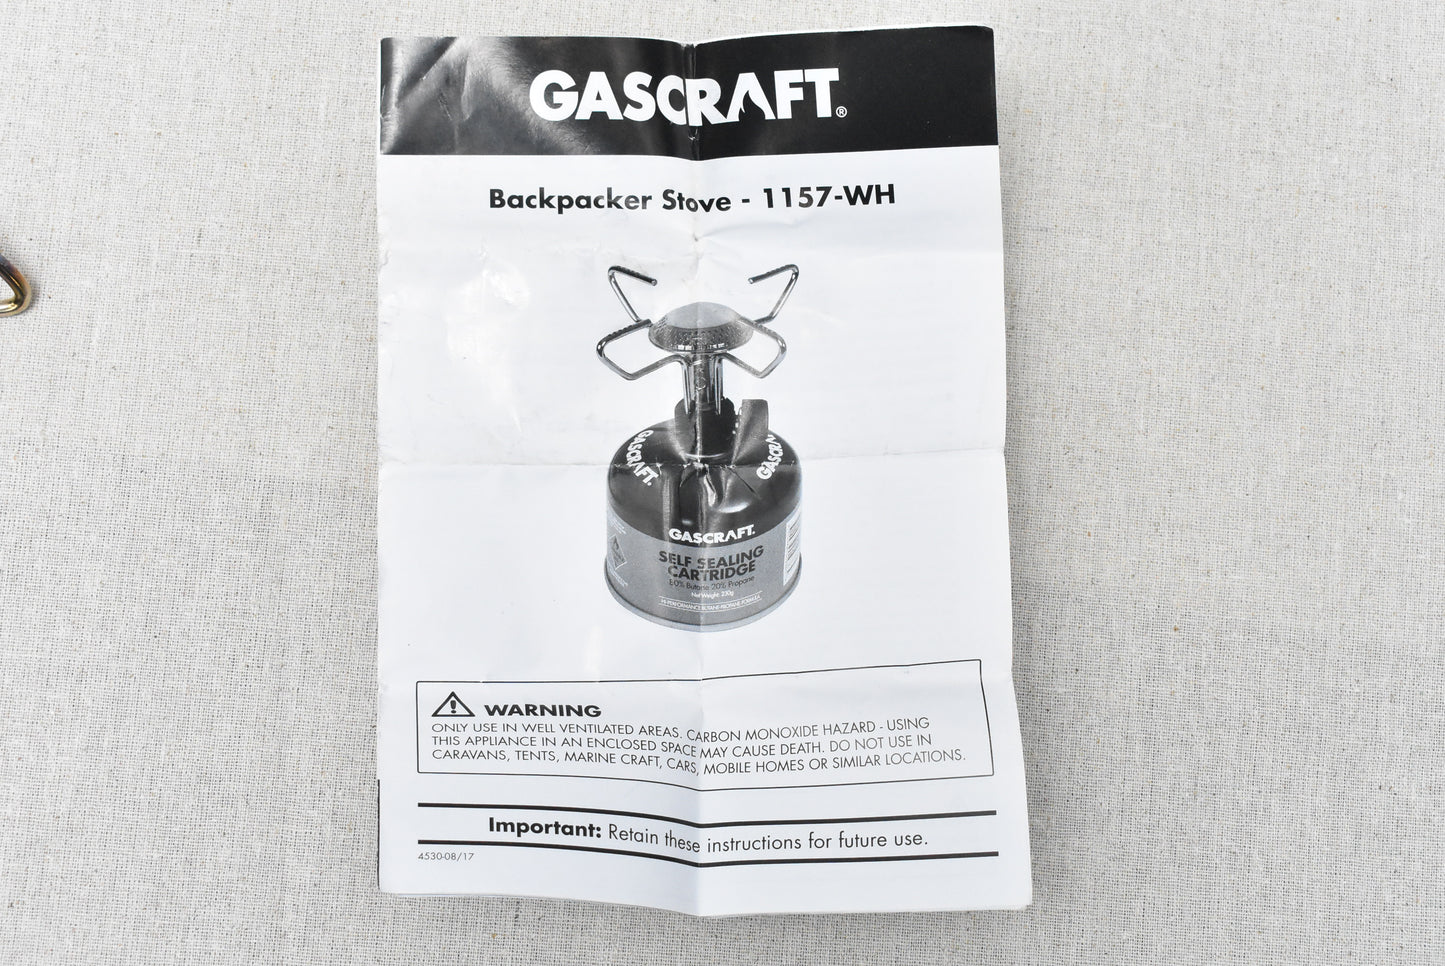 Gascraft backpacker stove